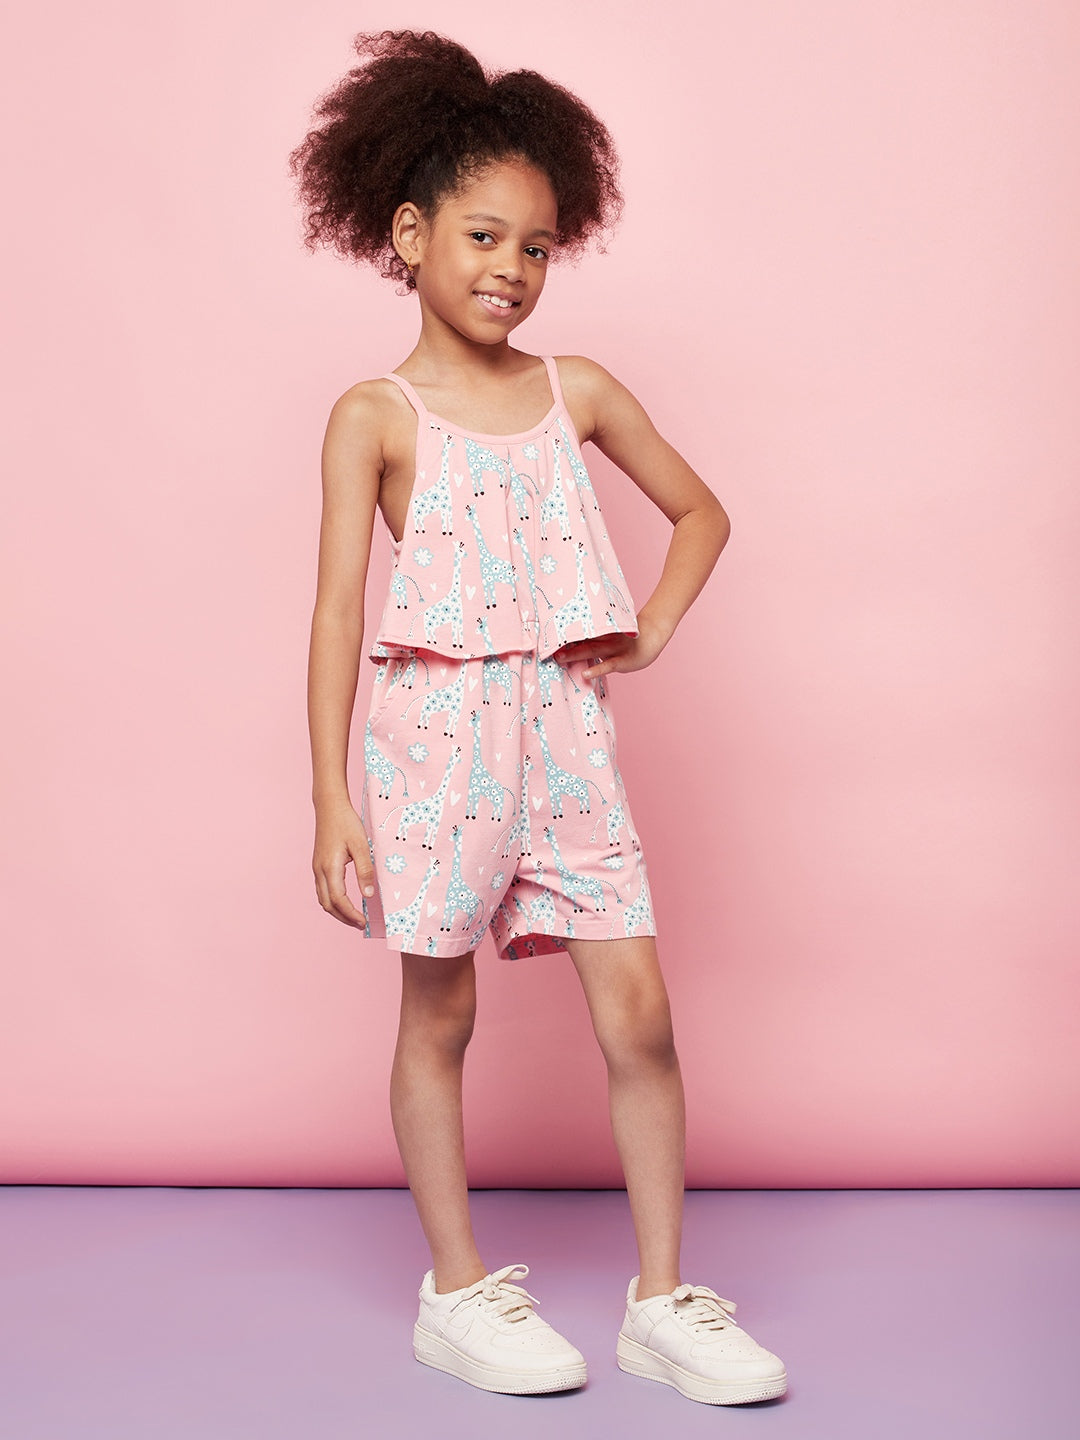 Jumpsuit For Kid Girls